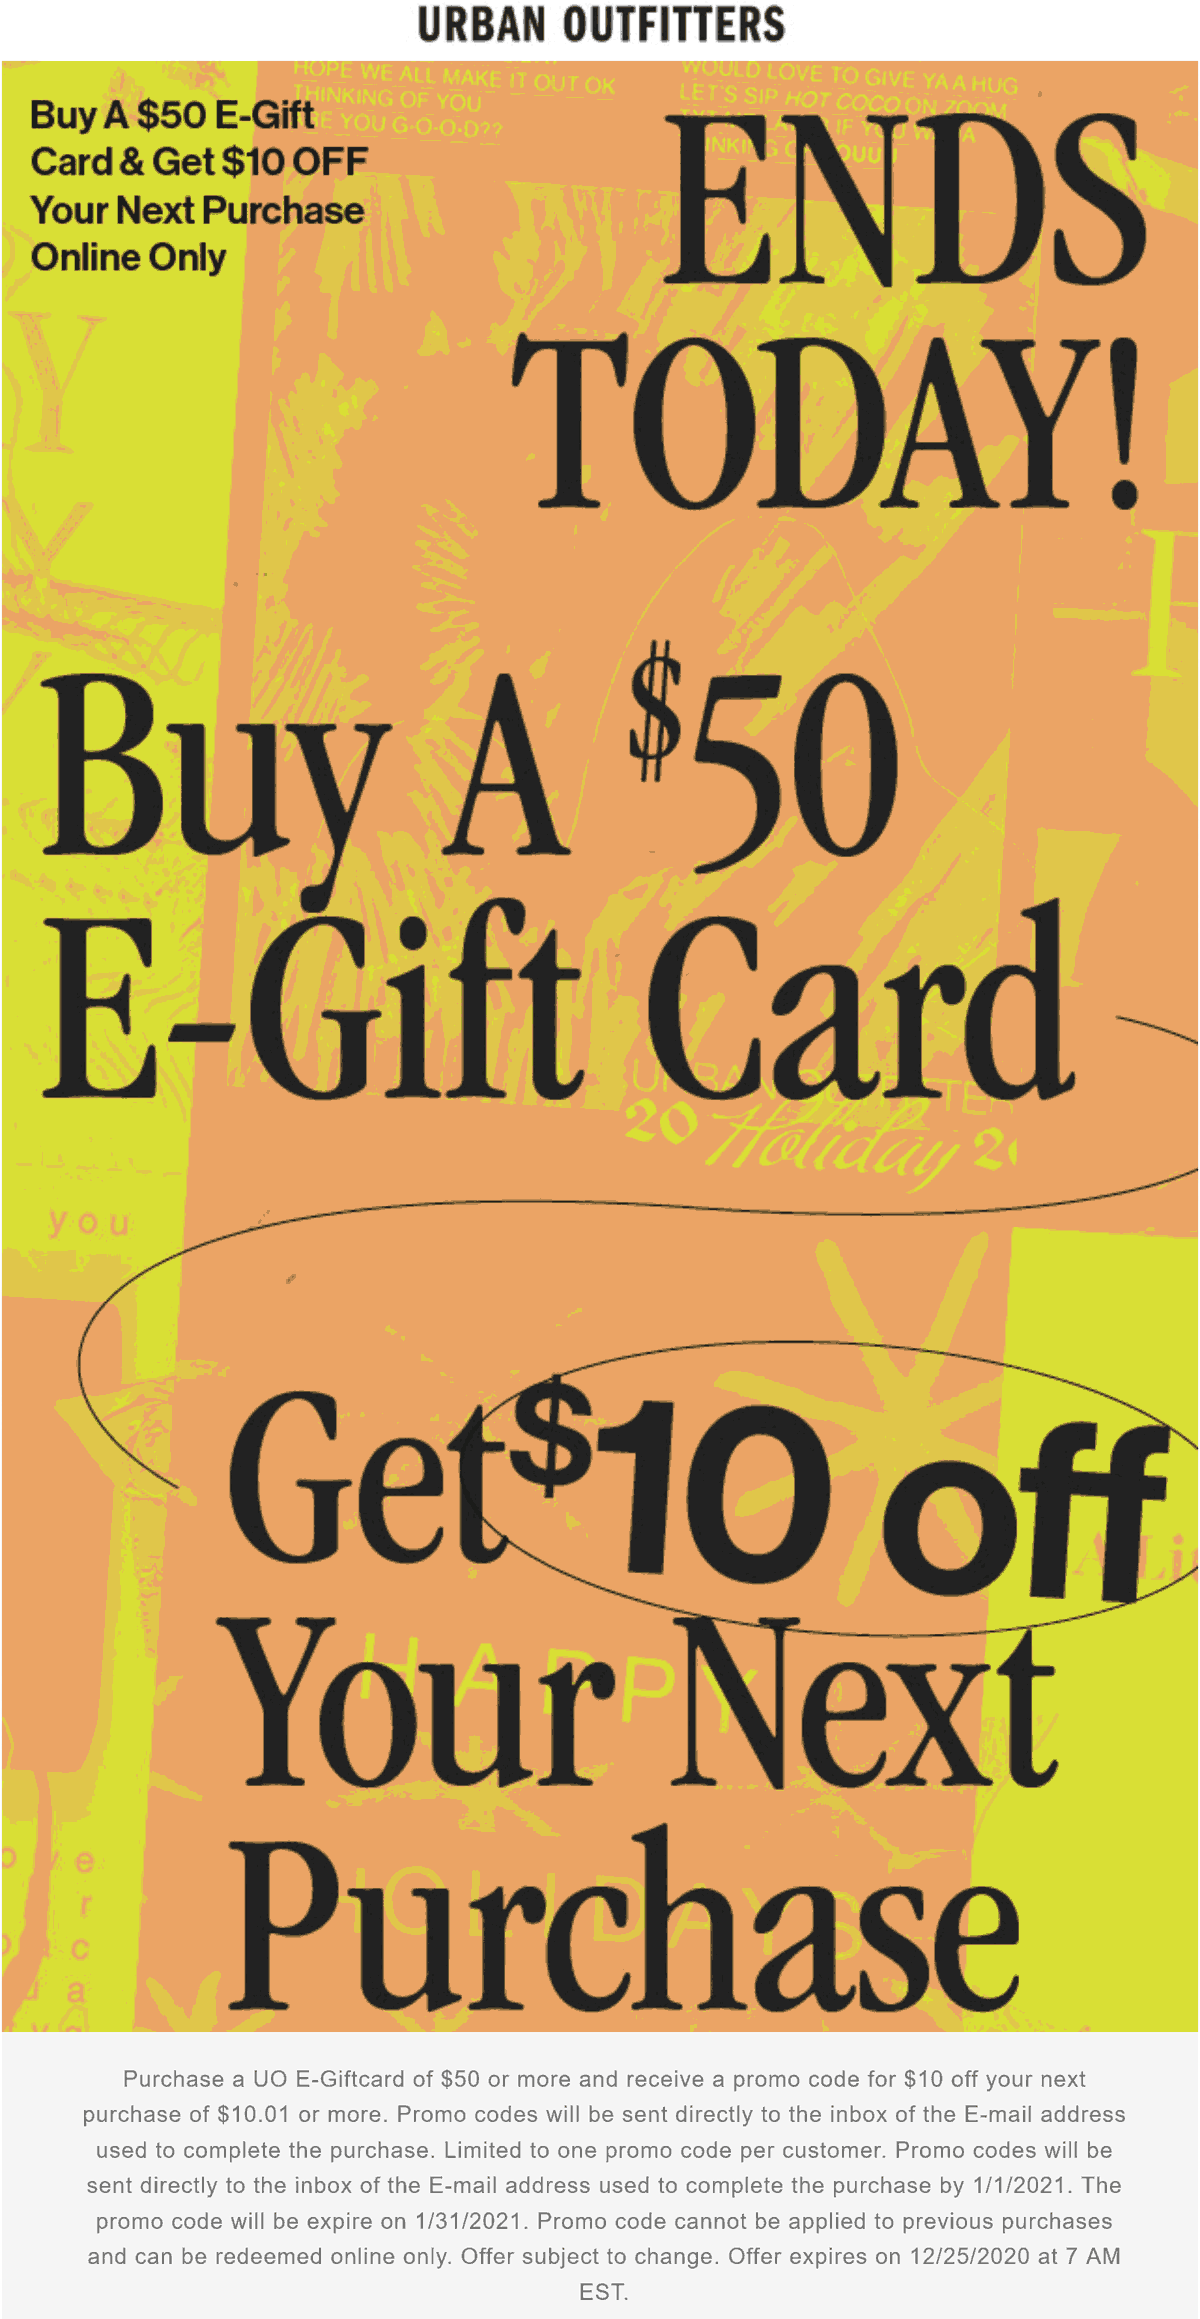 Urban Outfitters stores Coupon  $10 off followup with $50 gift card today at Urban Outfitters #urbanoutfitters 